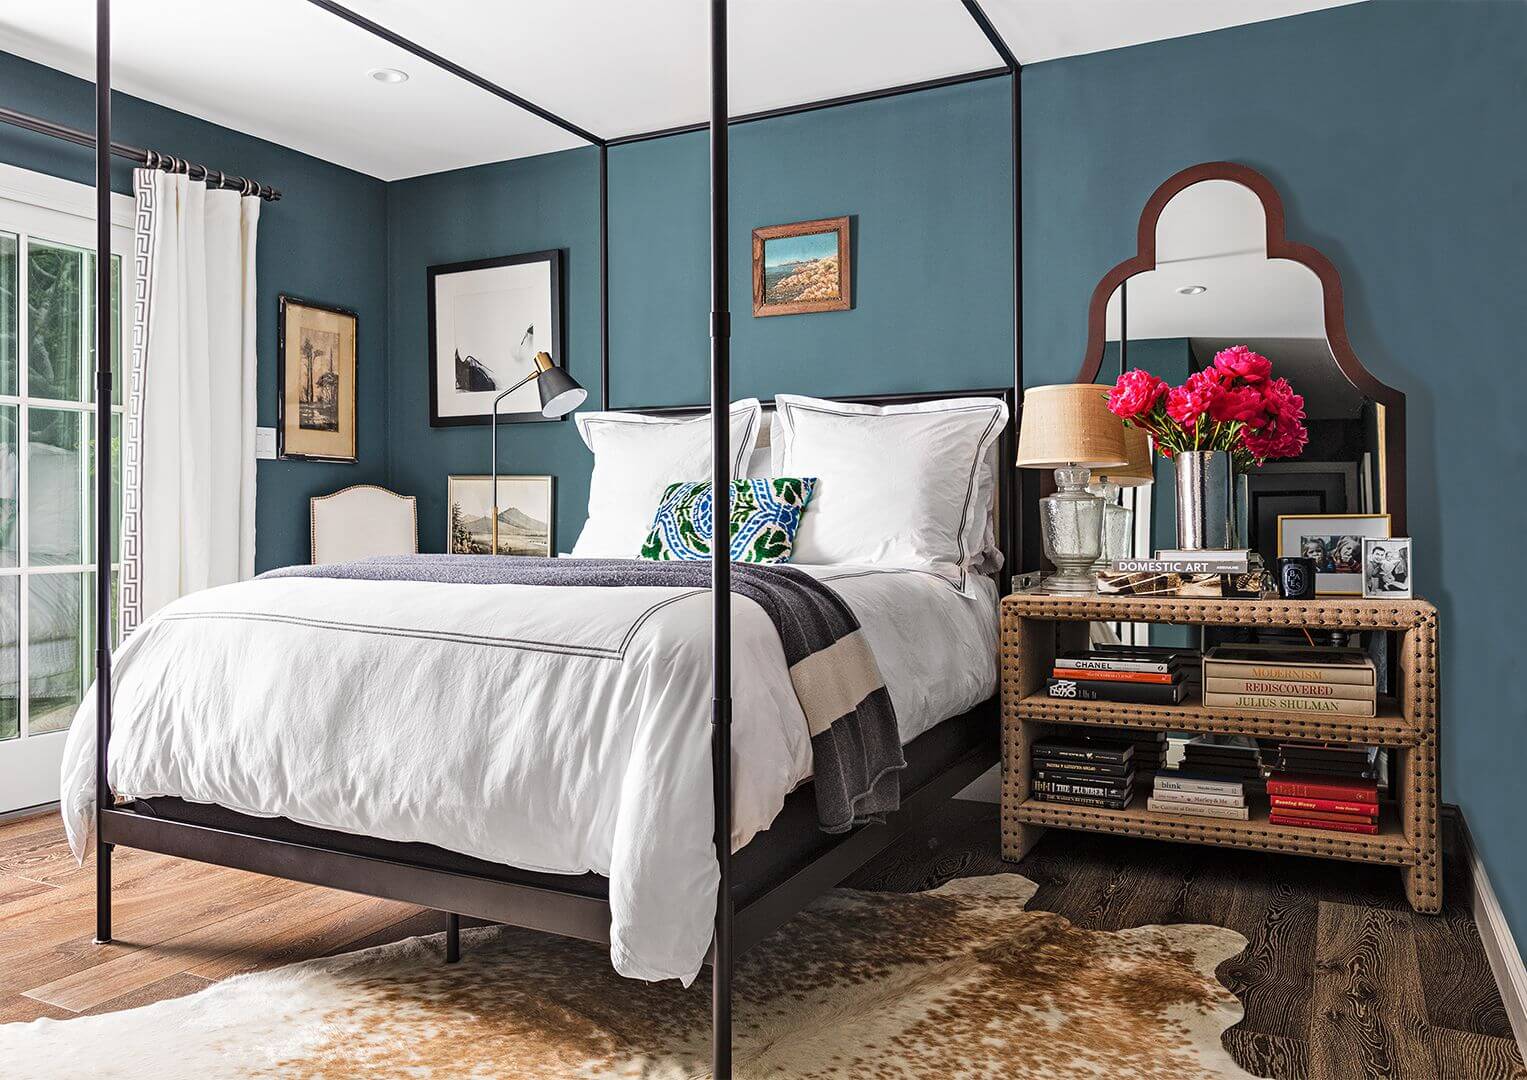 Choosing the Perfect Paint Colors